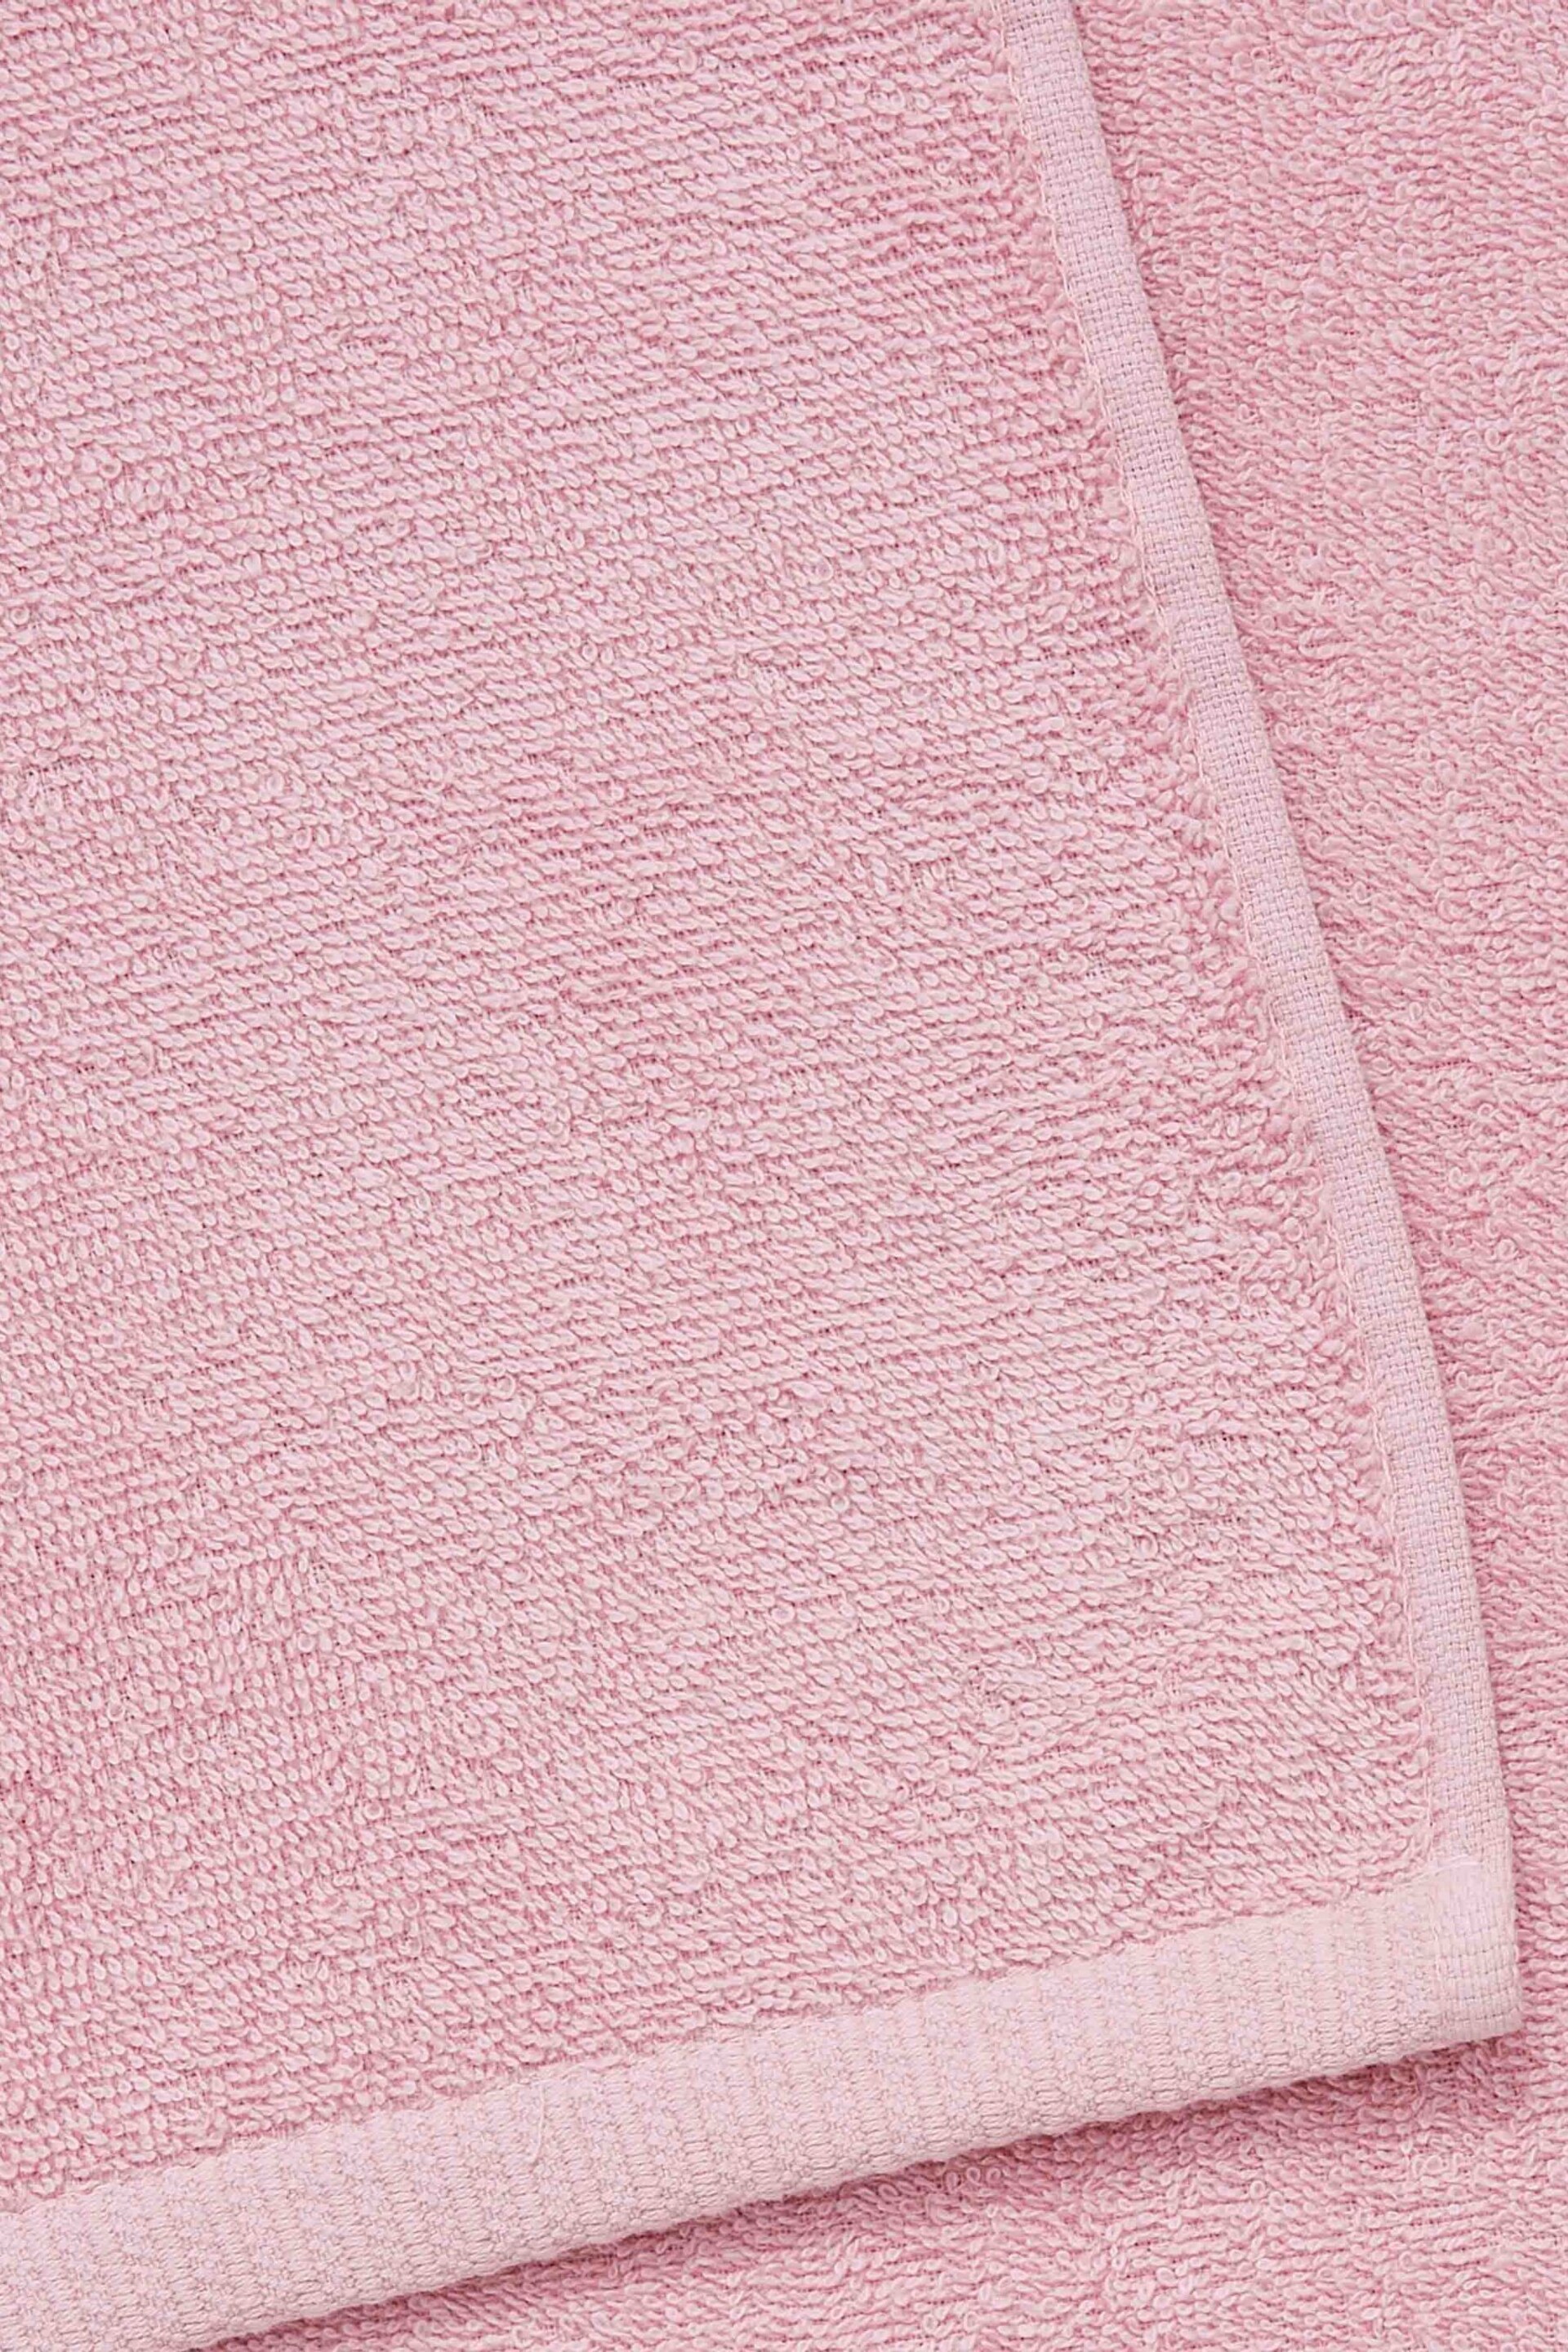 Catherine Lansfield Pink Quick Dry Cotton 8 Piece Towel Set - Image 2 of 3